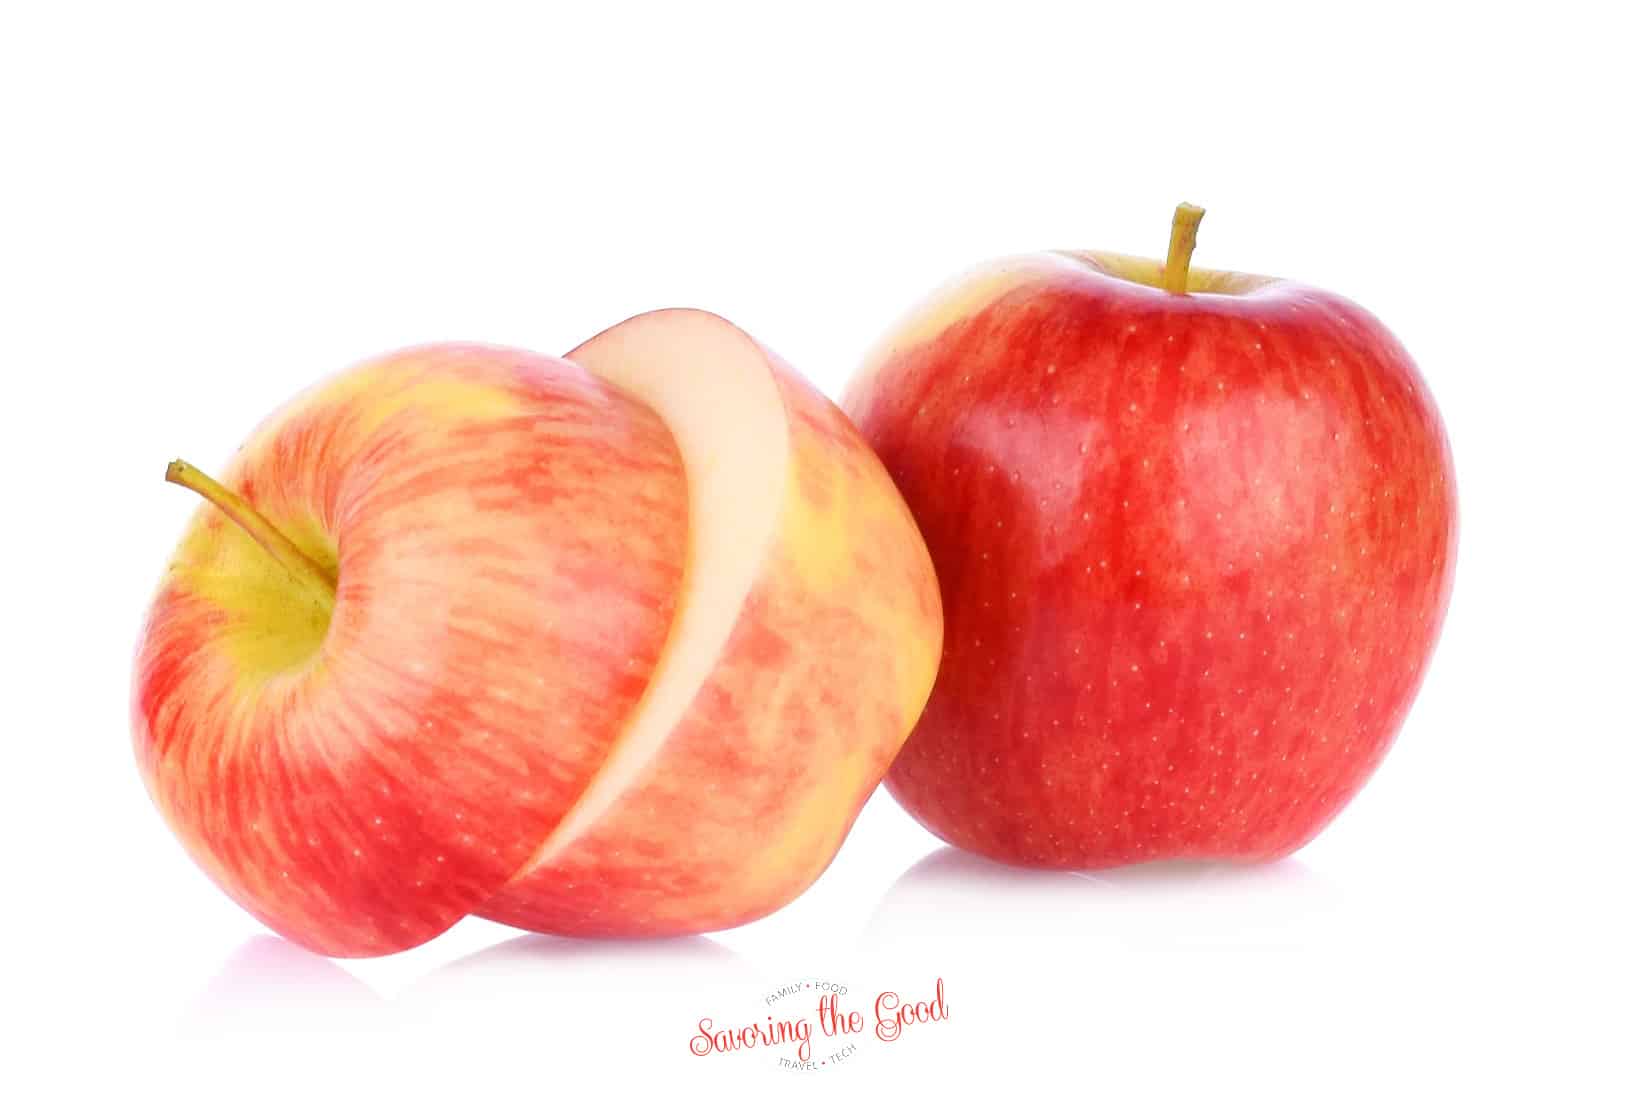 Two pink lady apples on a white background.one of the sliced in half horizontal.